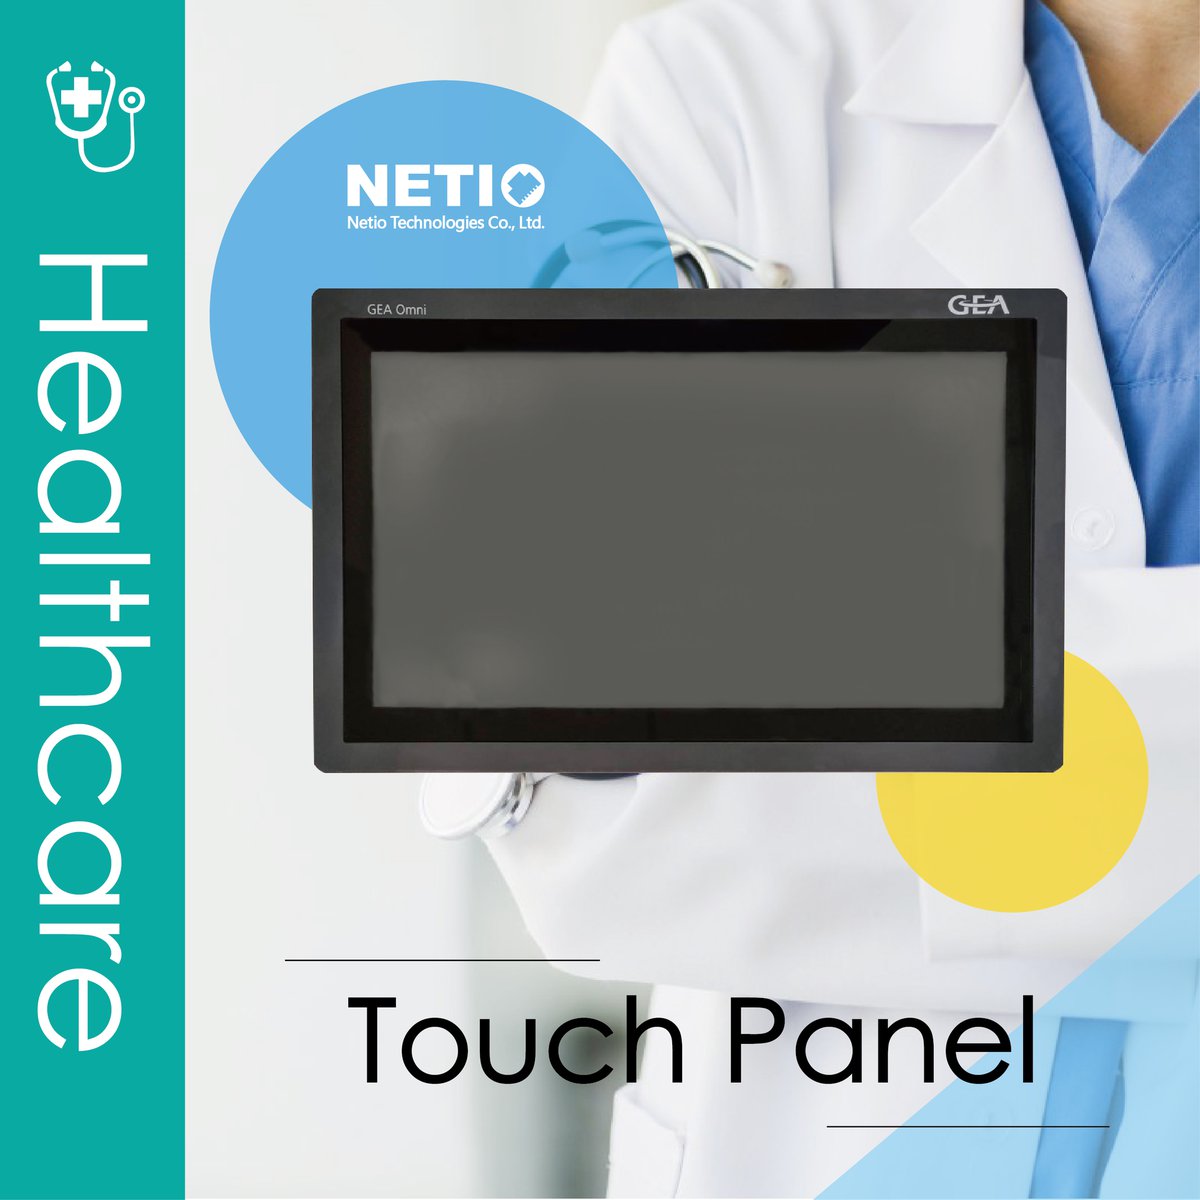 Netiotek PAL01-1560 15.6″ Panel PC has demonstrated experience in industrial-grade fanless applications such as transportation, medical devices, machine automation, and marine.